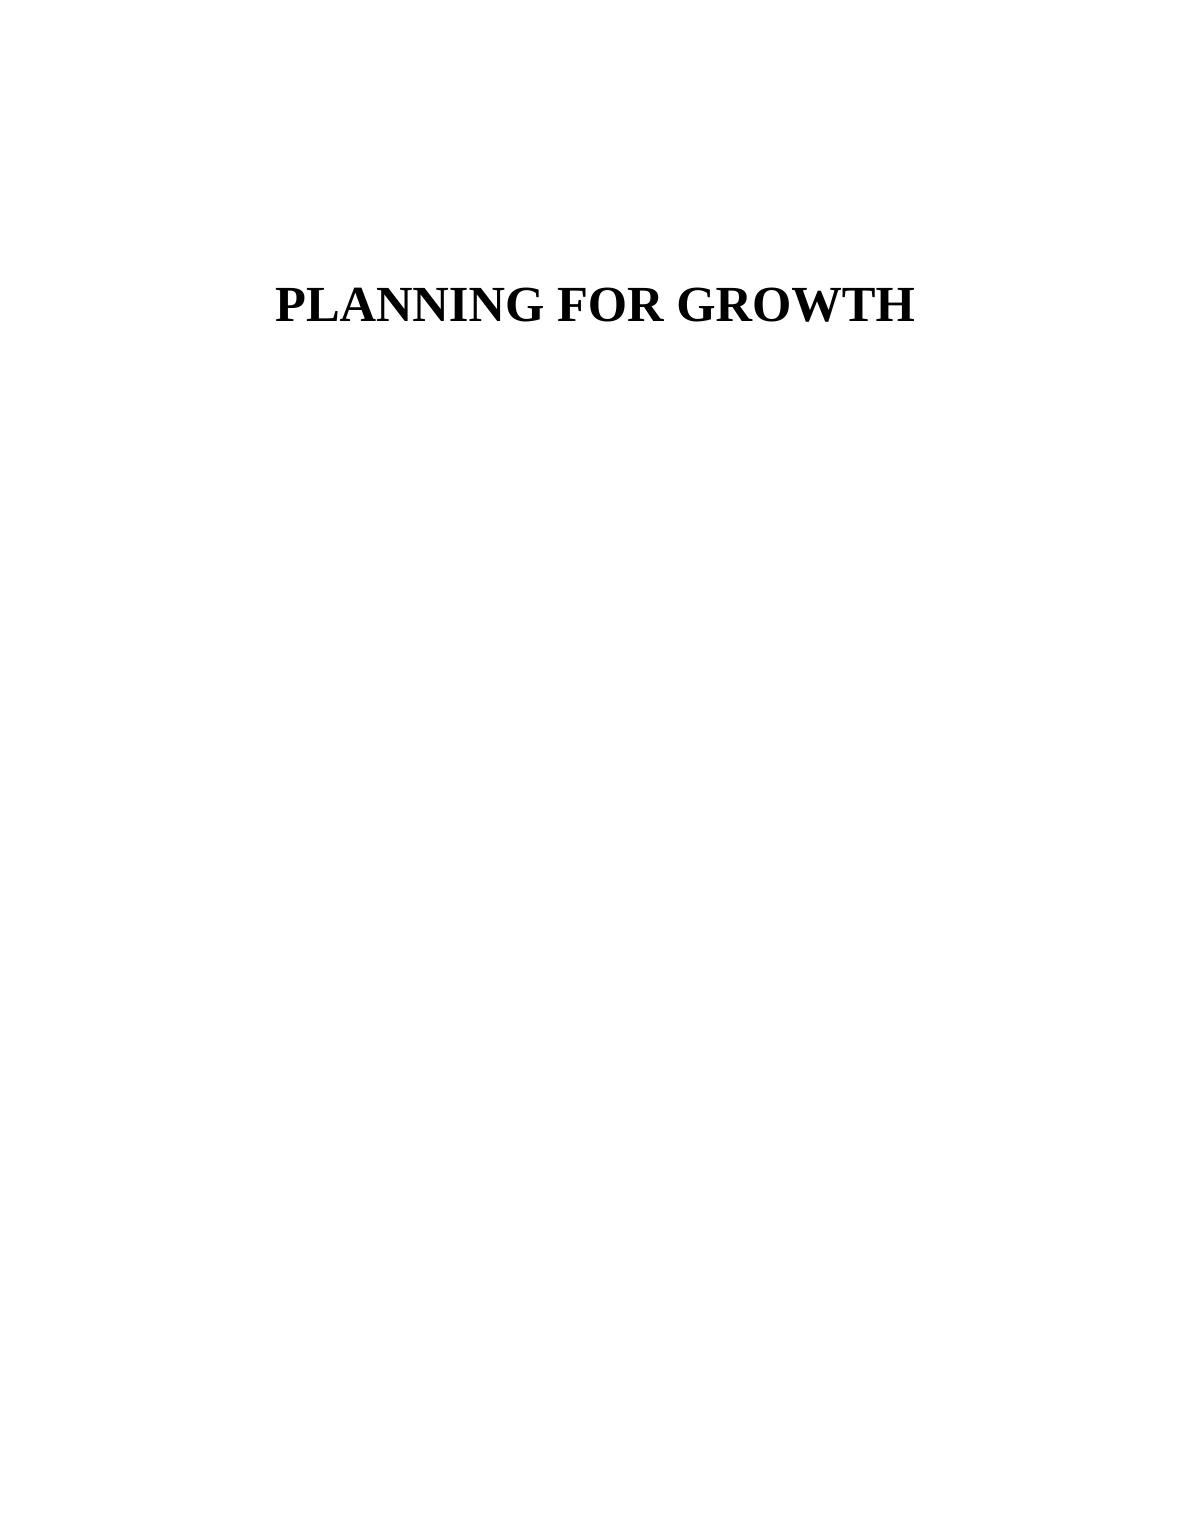 Planning for growth in R Robson 10_1